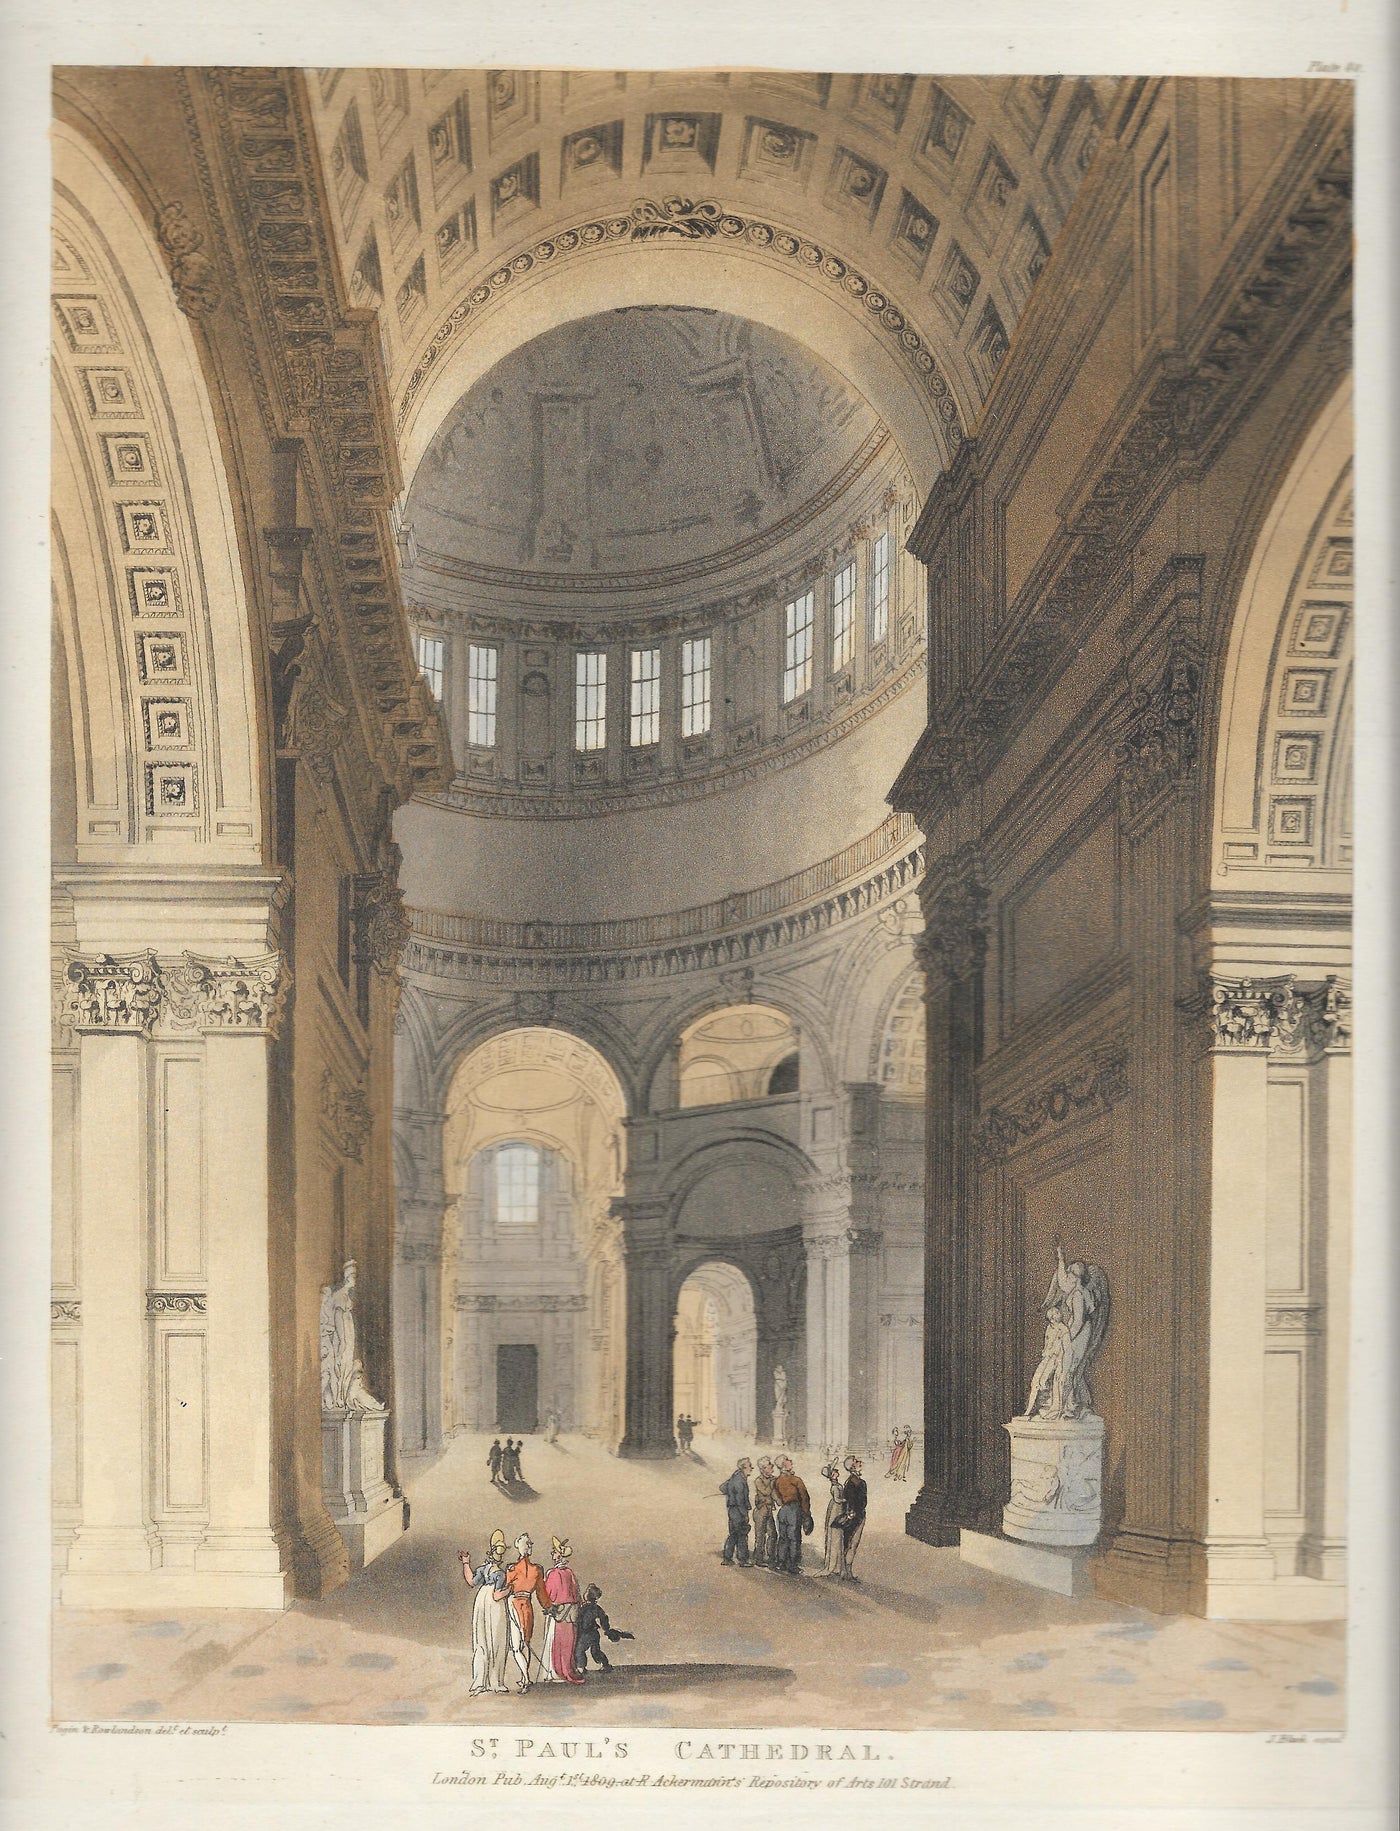 Sir Christopher Wren's St. Paul's Cathedral London antique hand-coloured aquatint, published 1809.